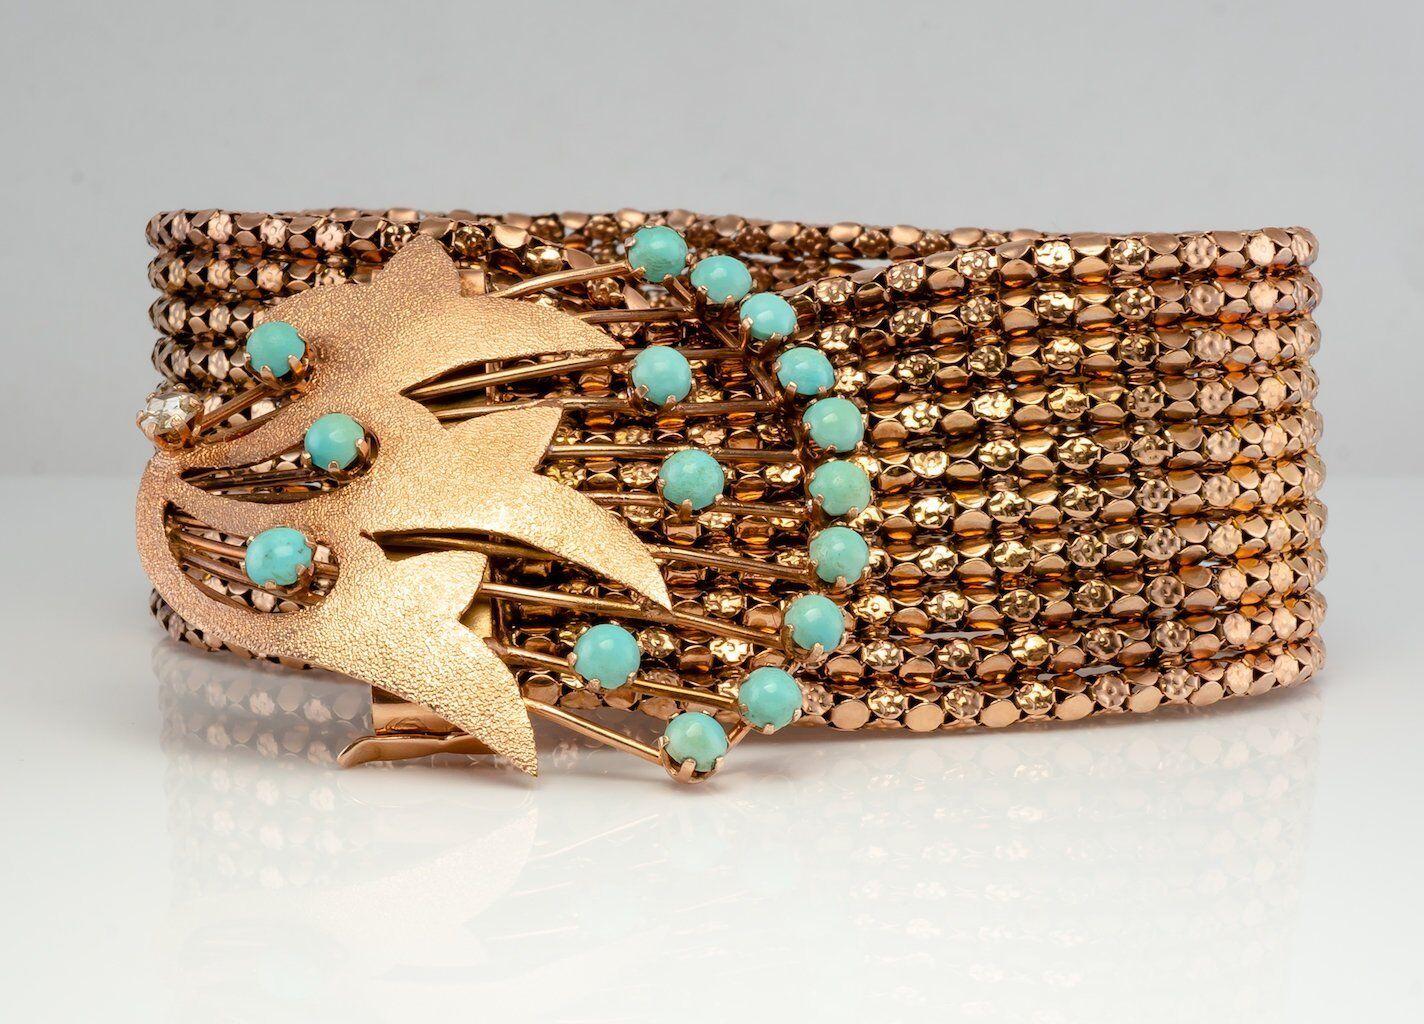 Gorgeous Turquoise Bracelet Gold Mesh. The main presentation holds 15 genuine Earth mined Turquoise of high quality. Each cabochon measures 3mm. It also has .08 carat Rose cut diamond of SI2 clarity and HI color. The center presentation measures